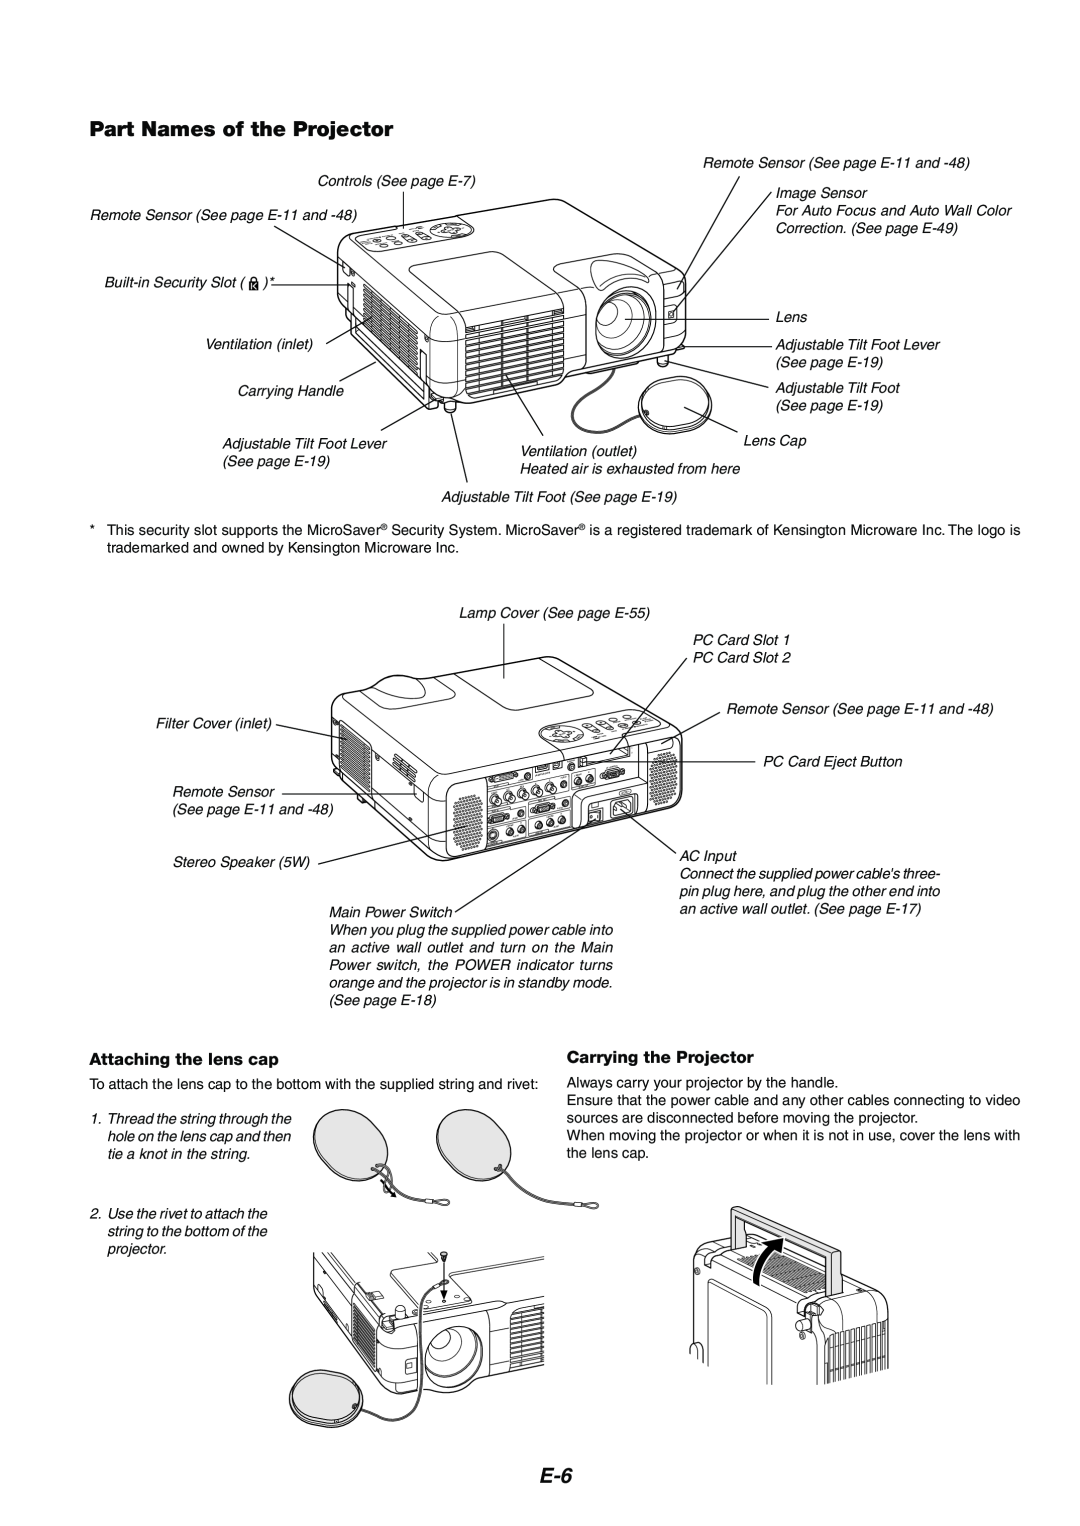 Kensington MT1075, MT1065 user manual Part Names of the Projector, Attaching the lens cap, Carrying the Projector 